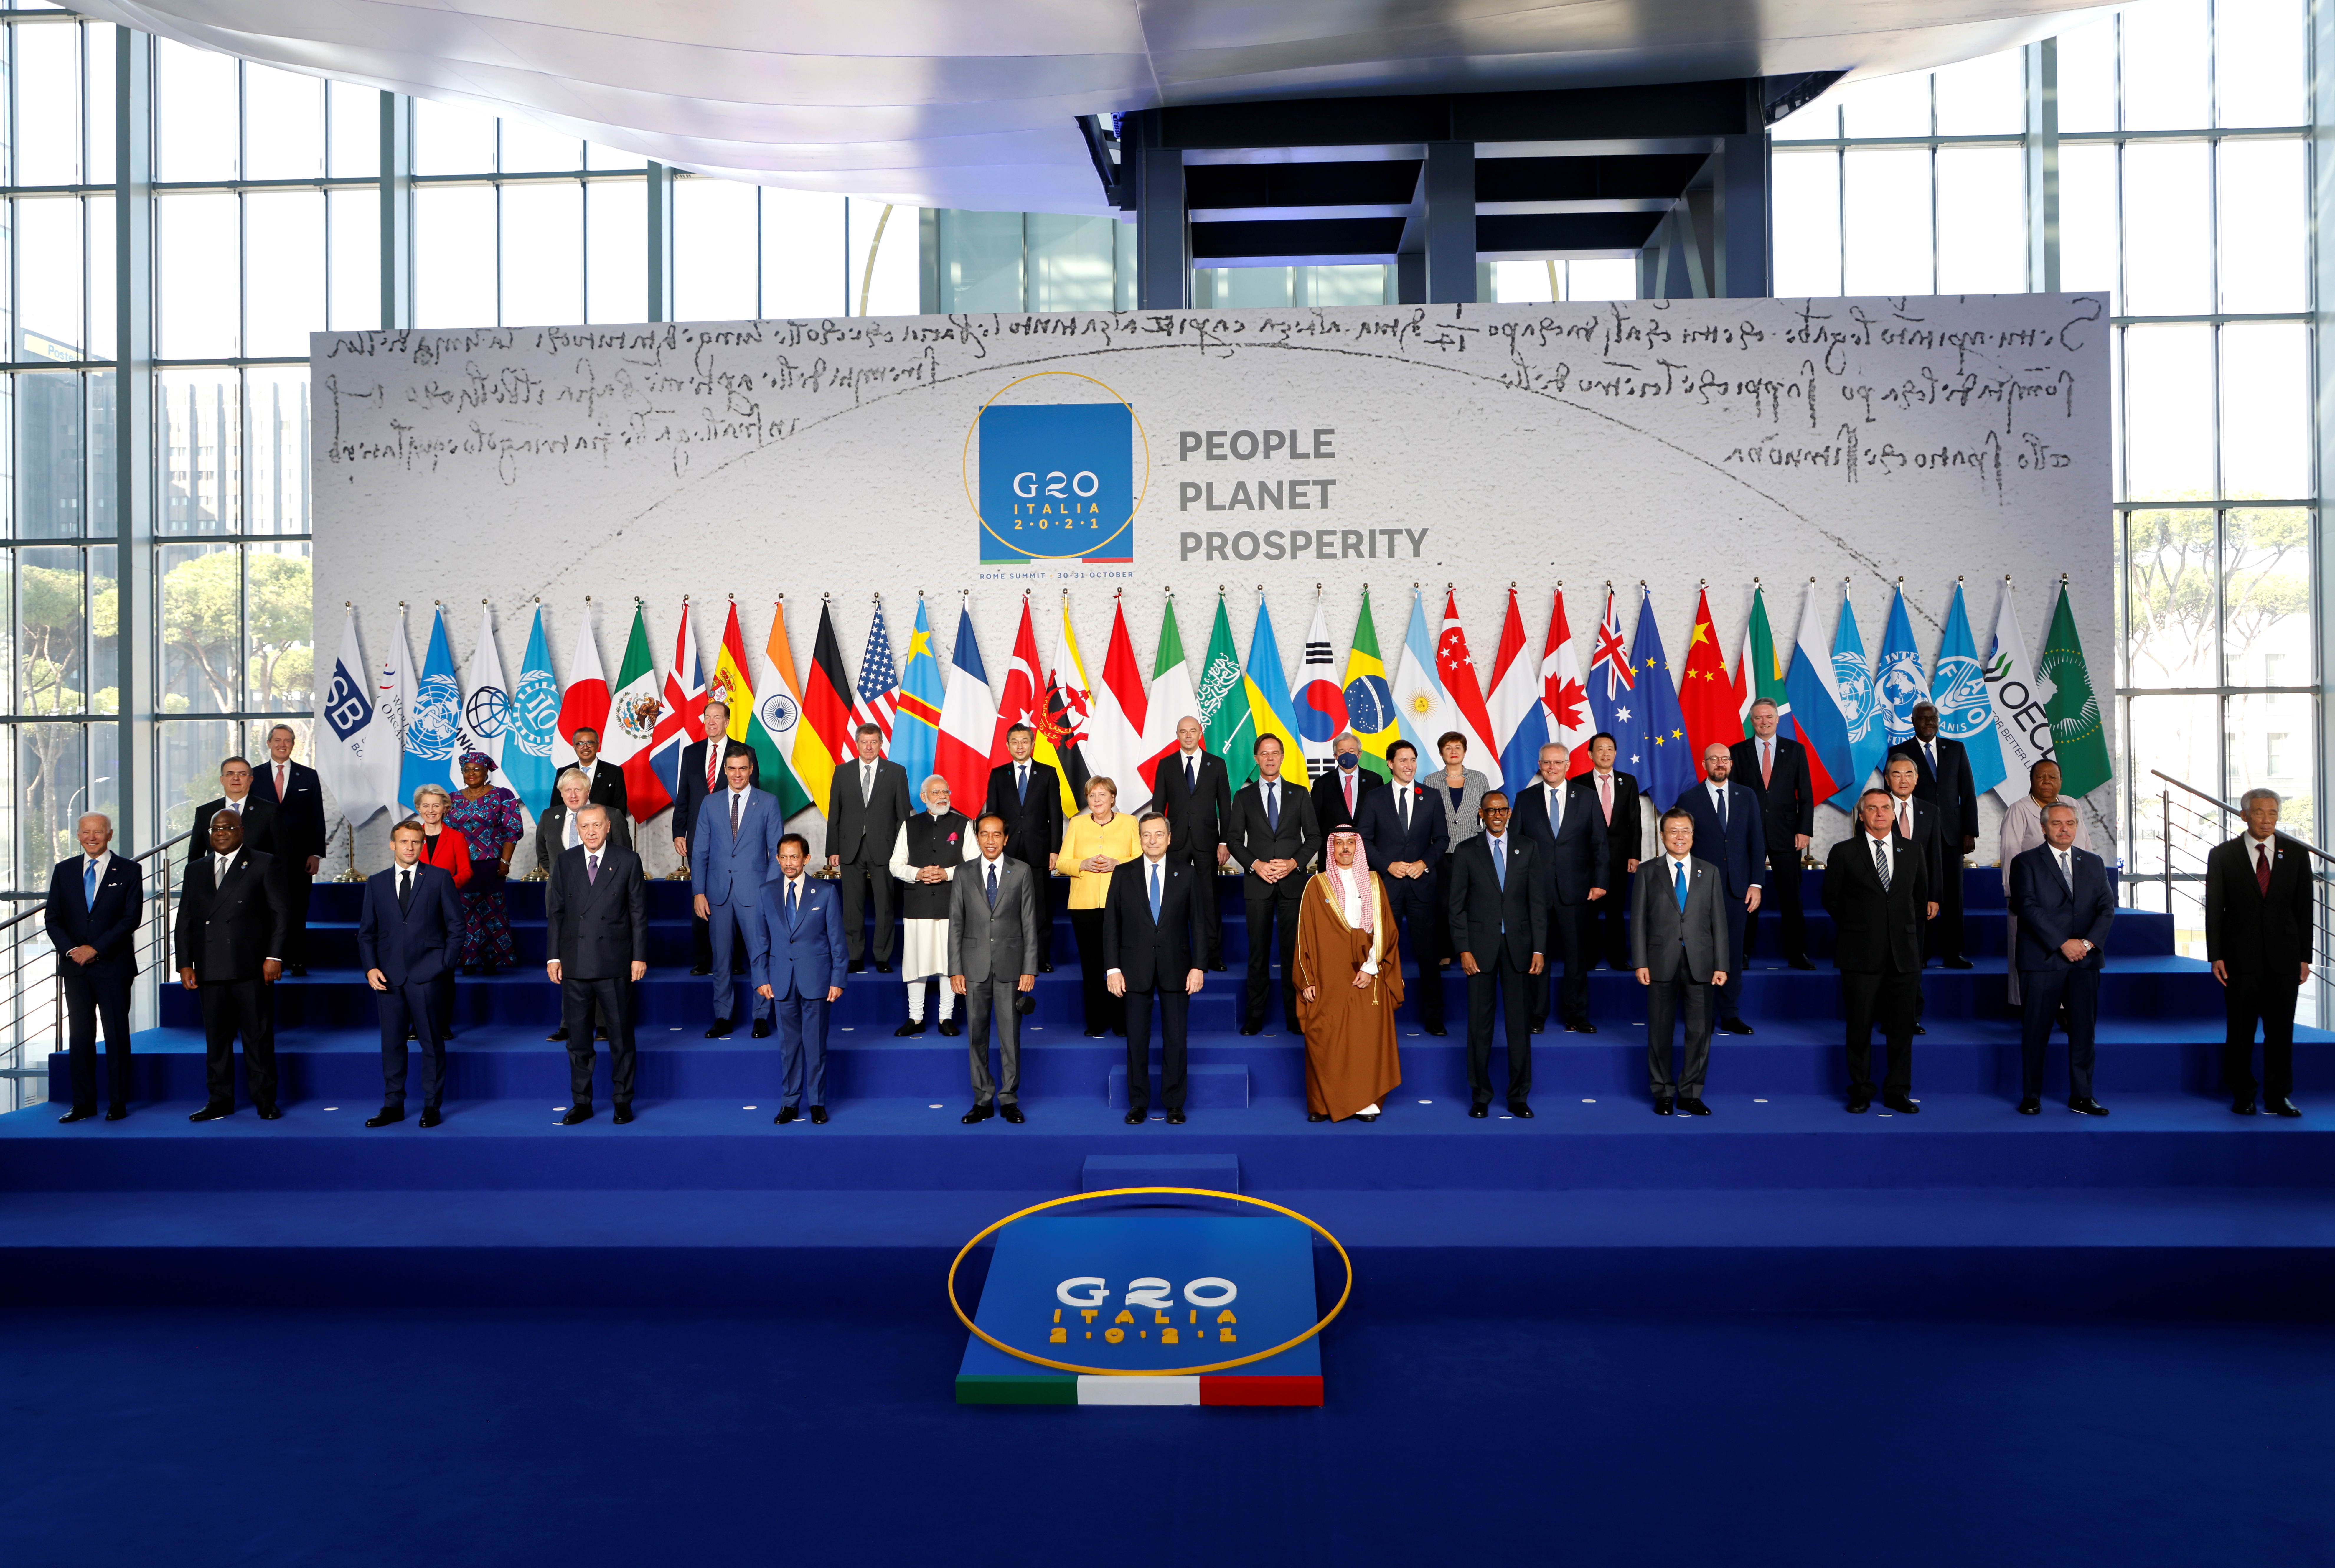 World leaders gather for the official family photograph on day one of the G20 leaders summit at the convention center of La Nuvola, in Rome, October 30, 2021. Ludovic Marin/Pool via REUTERS